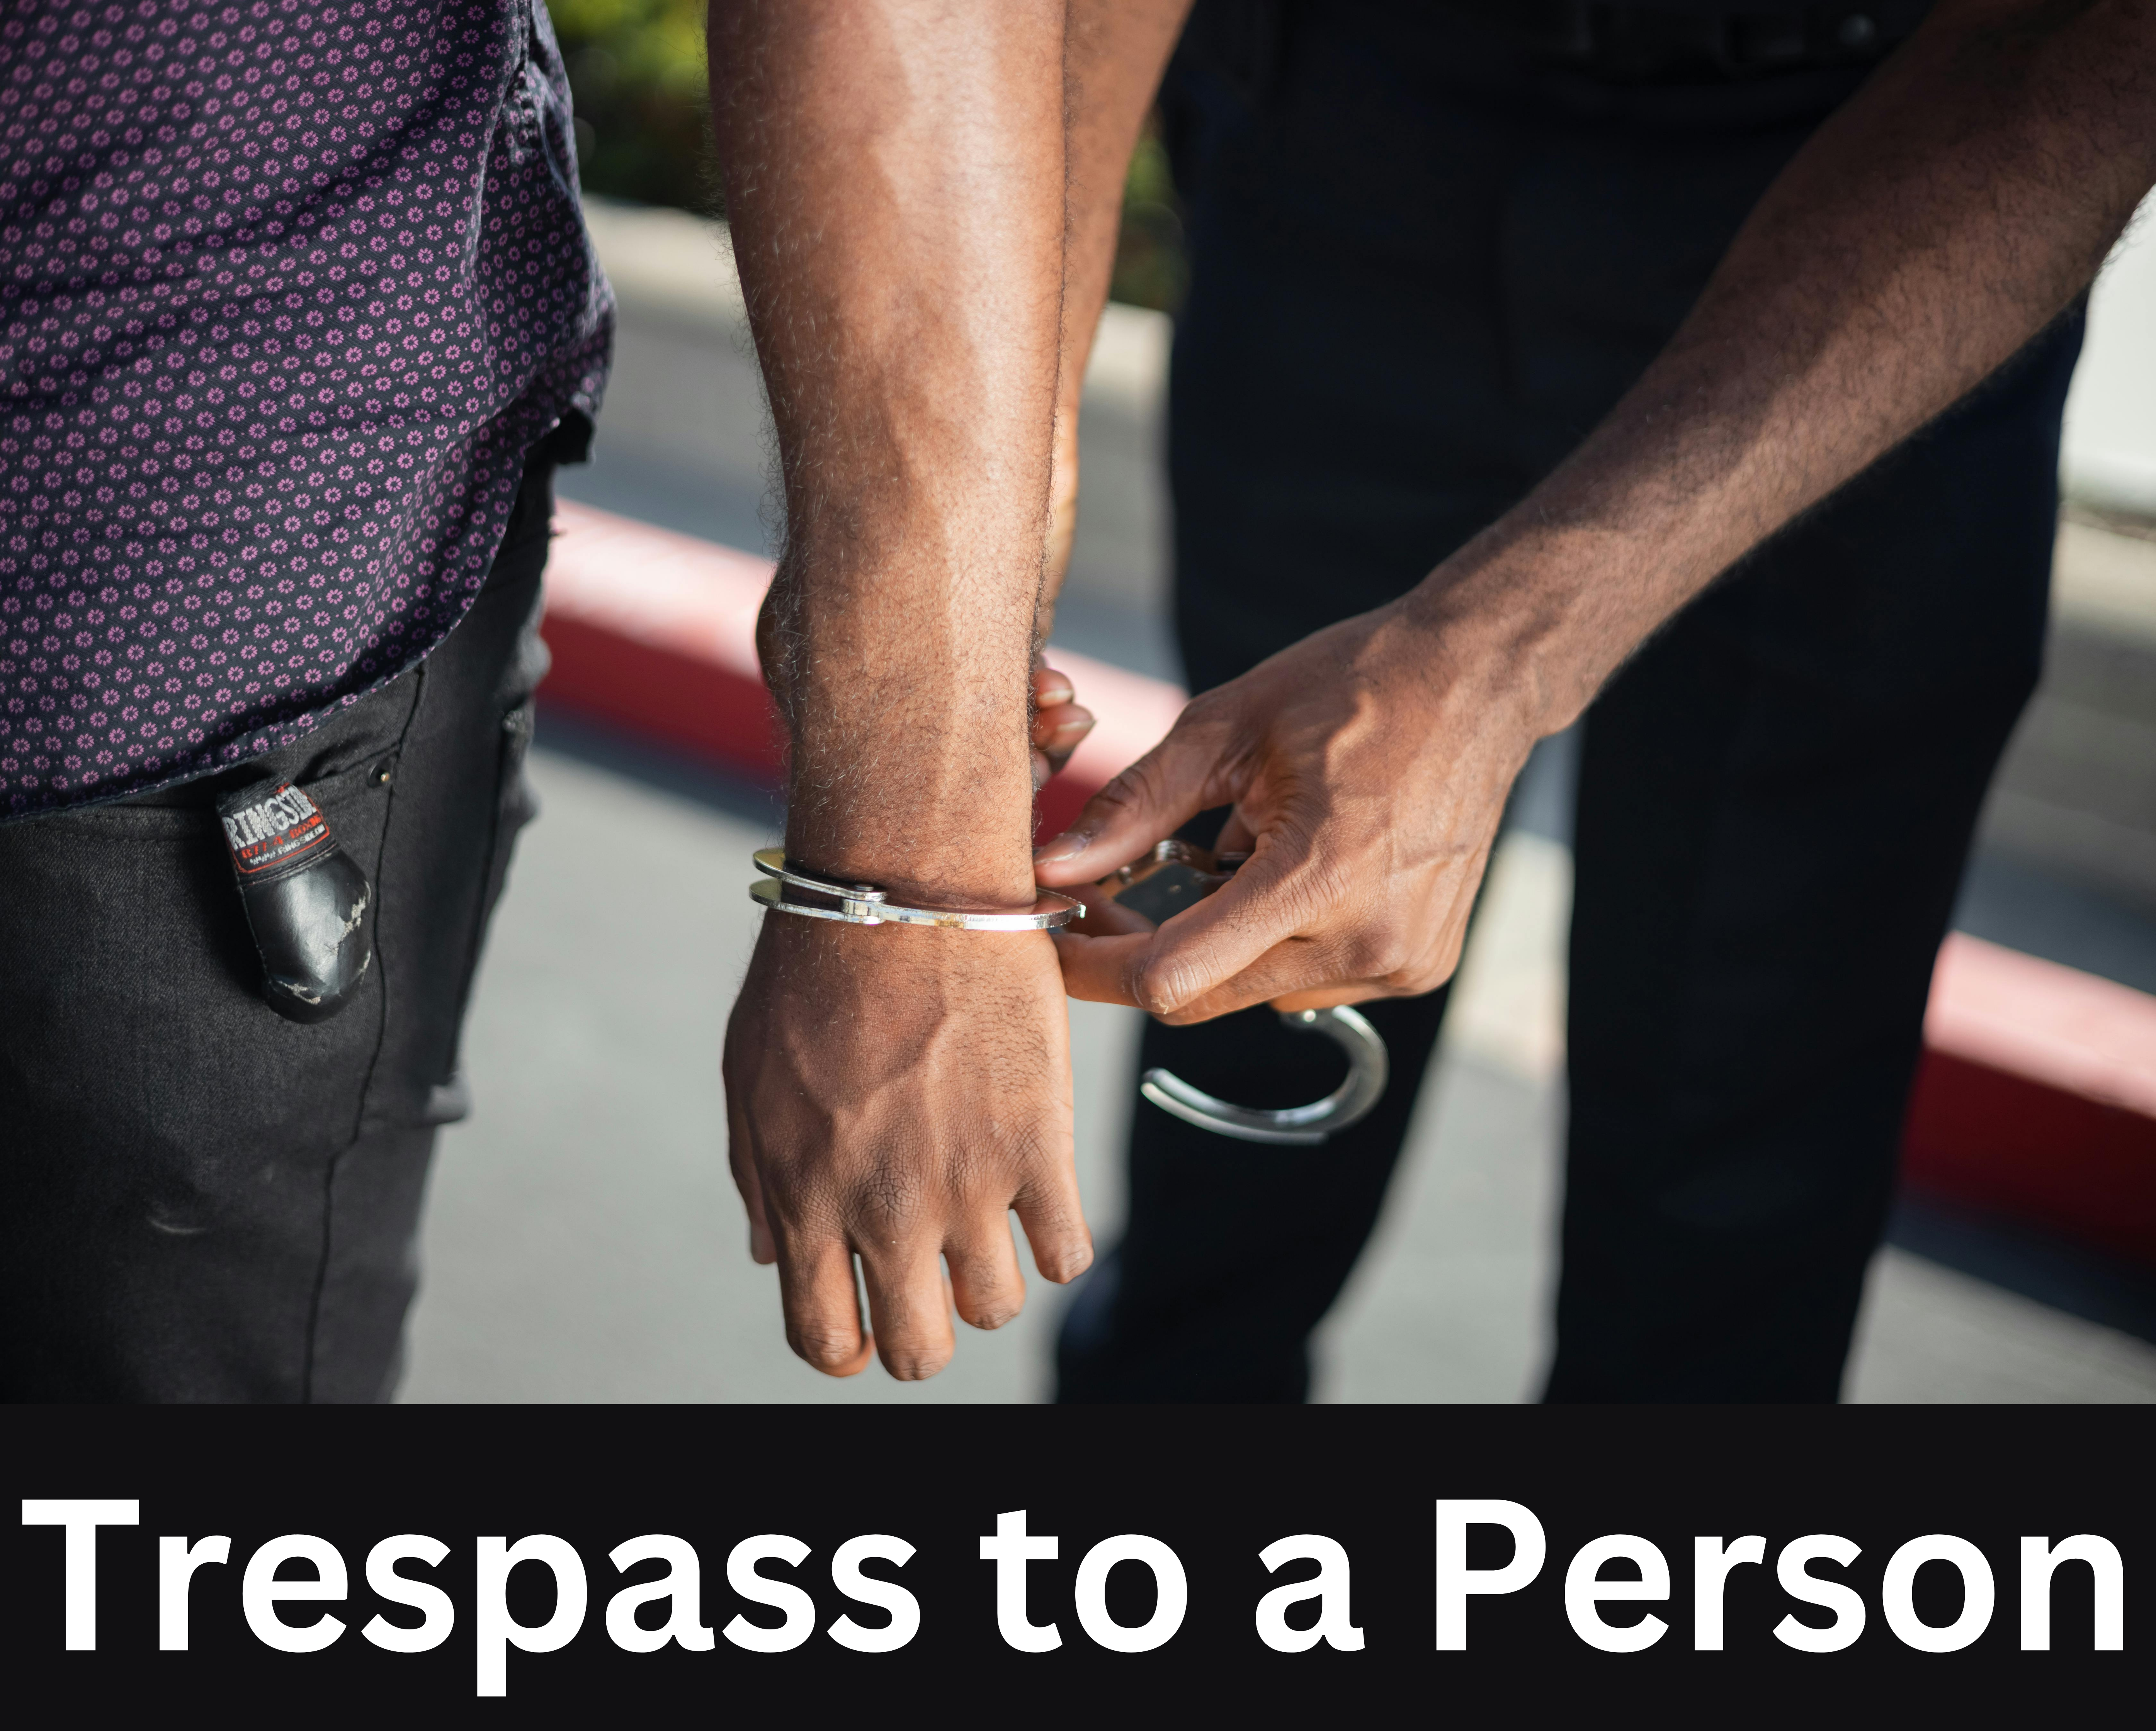 Trespass To A Person on land use act